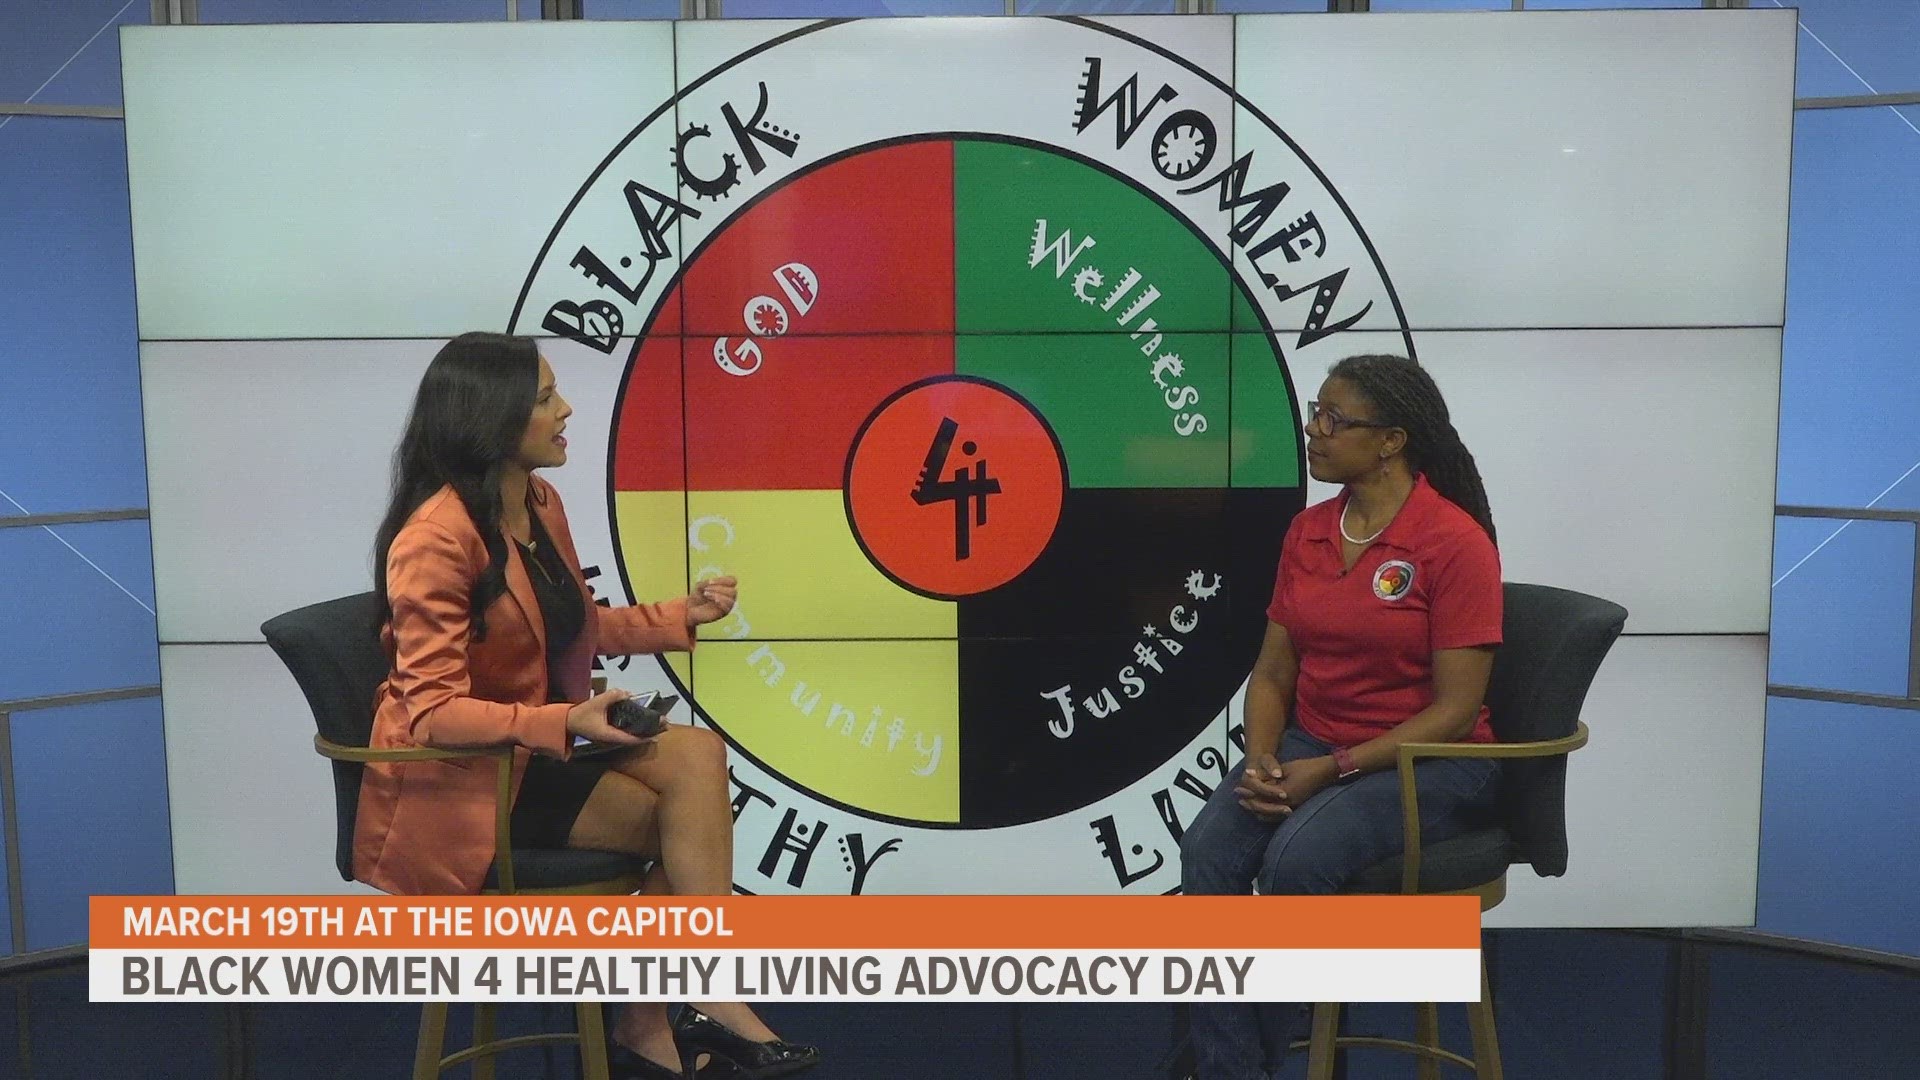 The organization Black Women 4 Healthy Living will be stationed in the Iowa State Capitol rotunda on Tuesday, March 19.